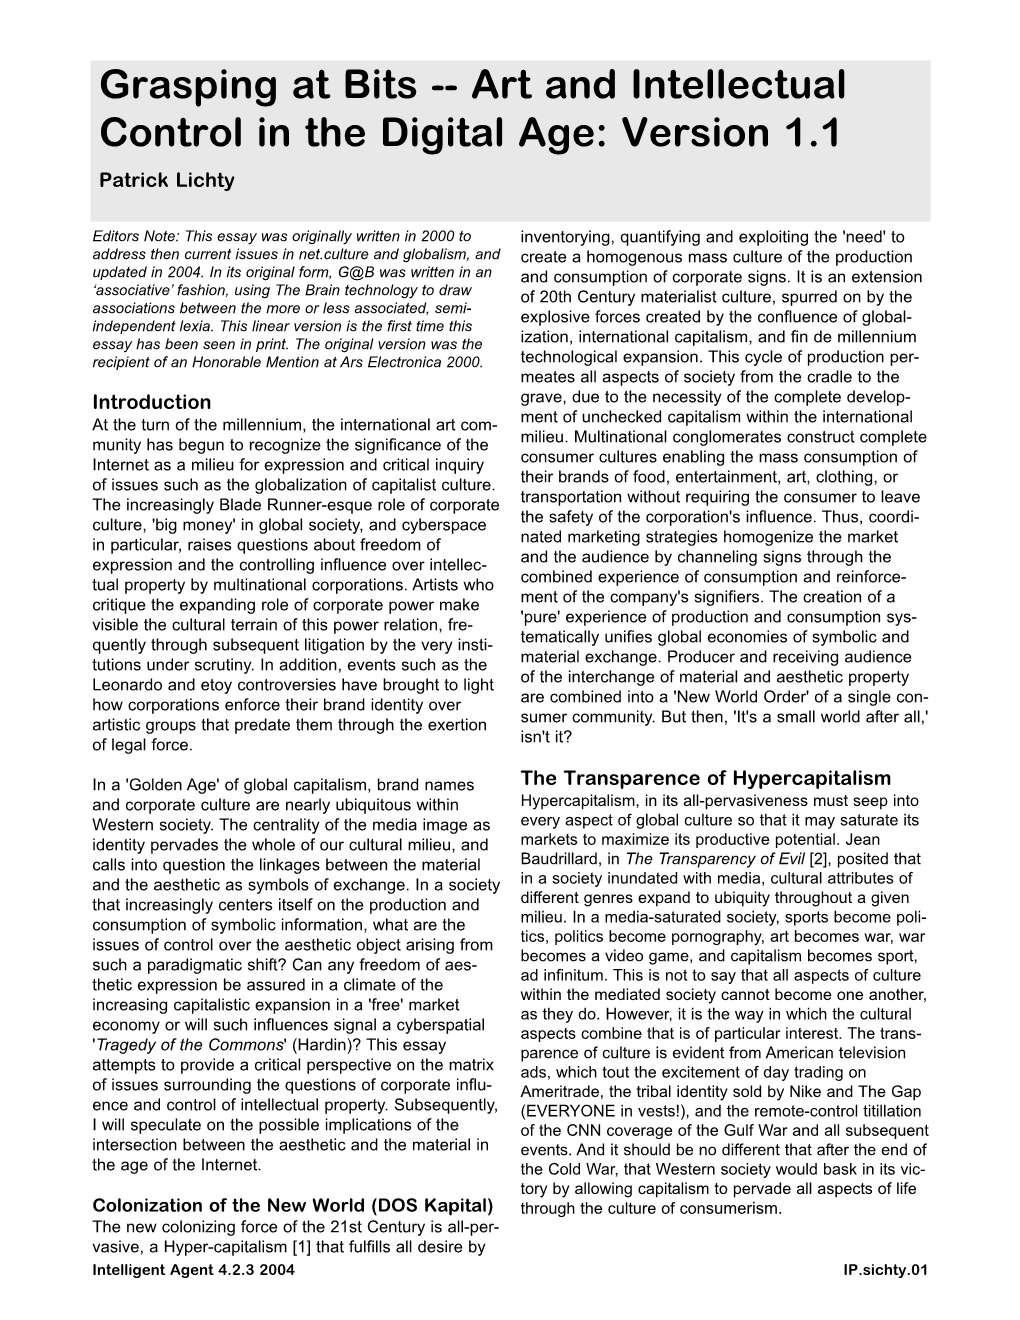 Art and Intellectual Control in the Digital Age: Version 1.1 Patrick Lichty